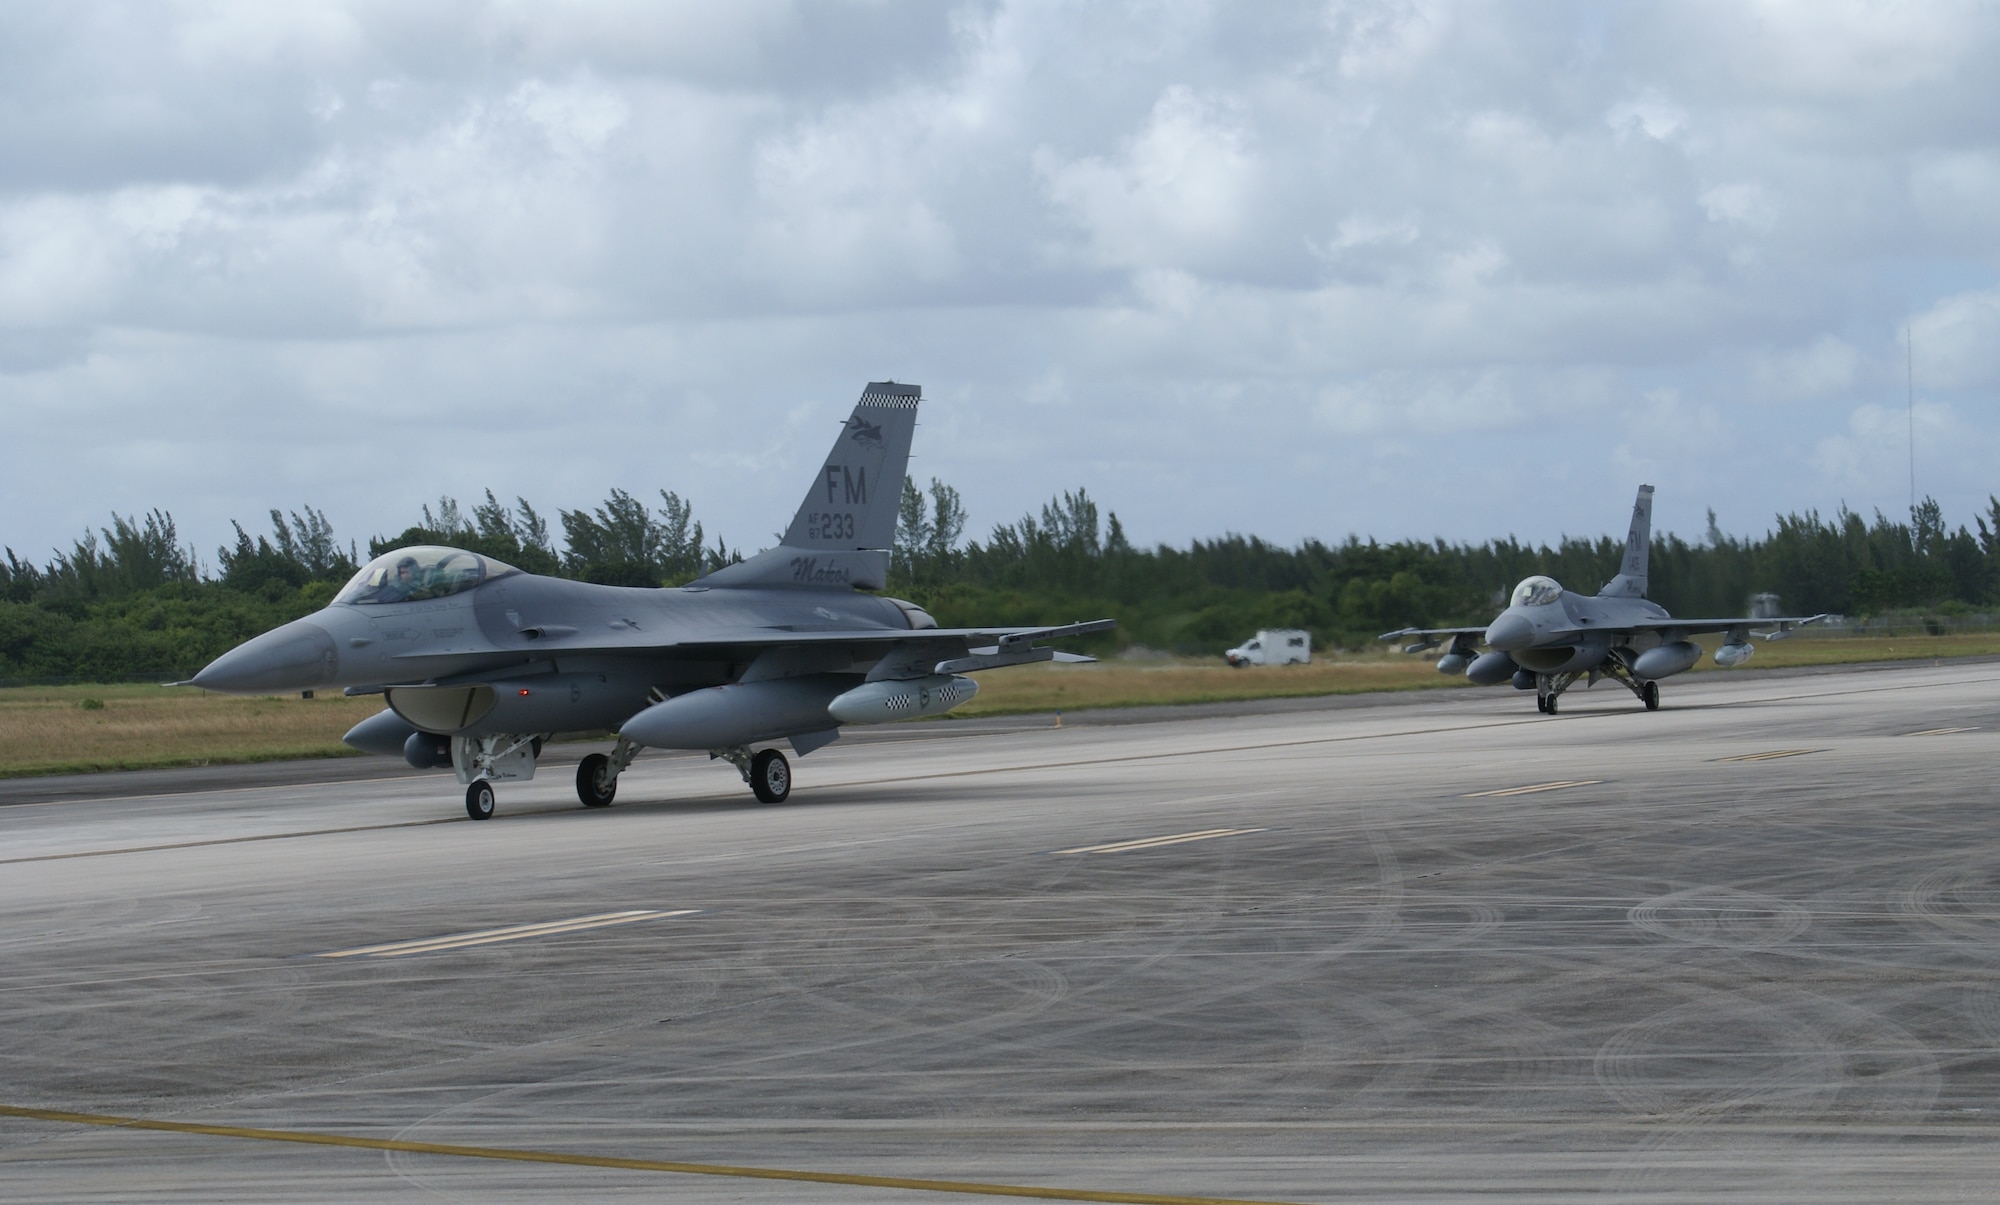 F-16 aircraft from the 482nd Fighter Wing, Homestead Air Reserve Base, Fla., taxi for takeoff Oct. 30, 2007.  A total of 24 F-16 fighter jets left Homestead ARB for Dobbins Air Reserve Base, Ga., as part of preparations for Tropical Storm Noel. The early evacuation allows pilots and maintenance personnel to return home to south Florida in time to care for their families before a storm. The movement of jets is a precaution to protect this valuable national asset. (U.S. Air Force photo/Tim Norton)